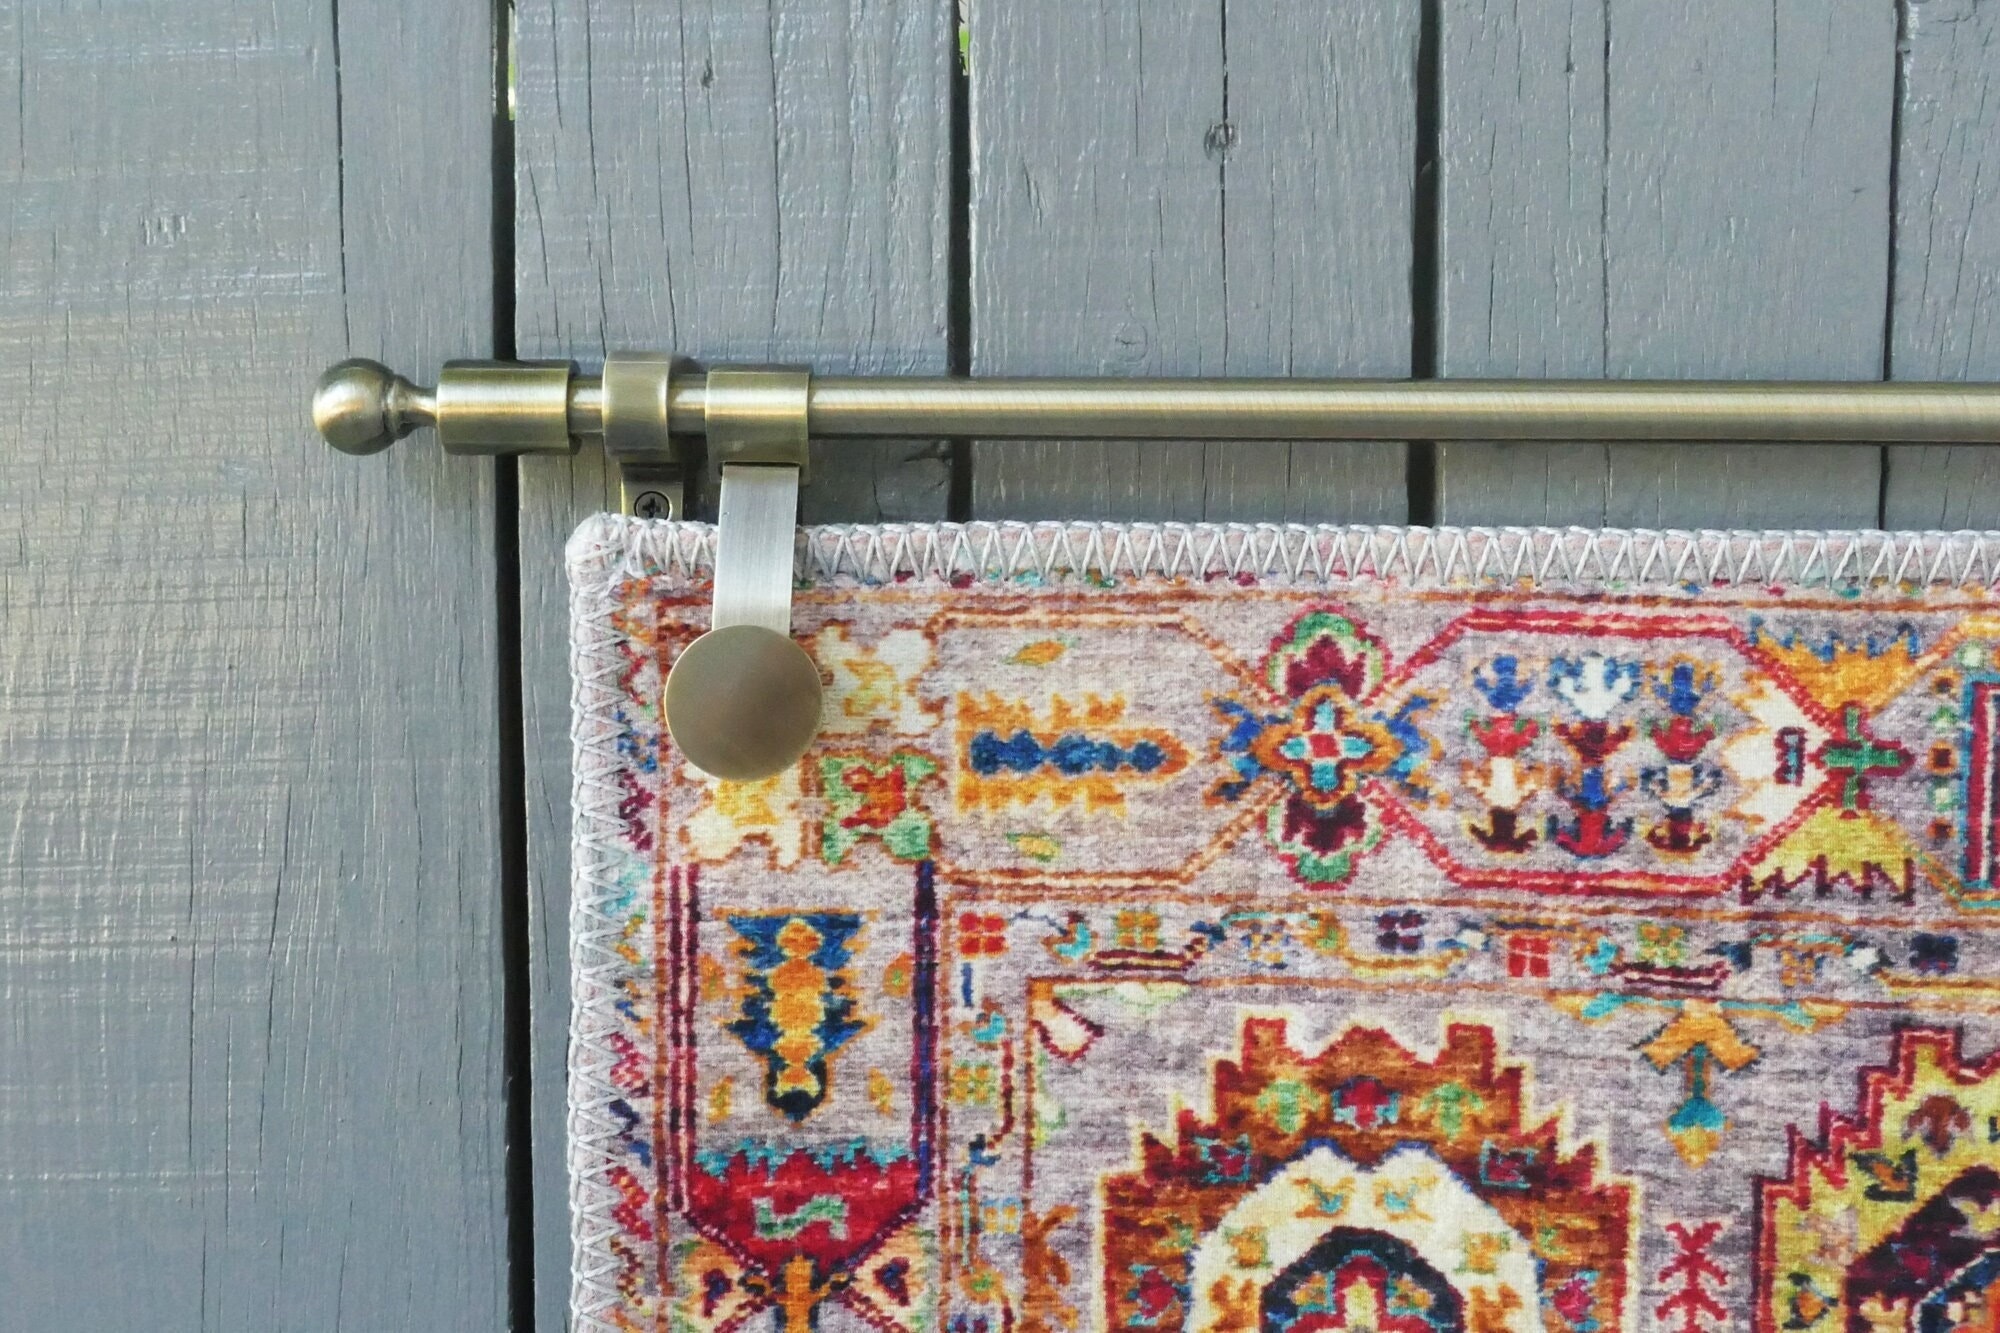 Quilt Hangers - The Ultimate Guide to Hanging Quilts, Rugs, and